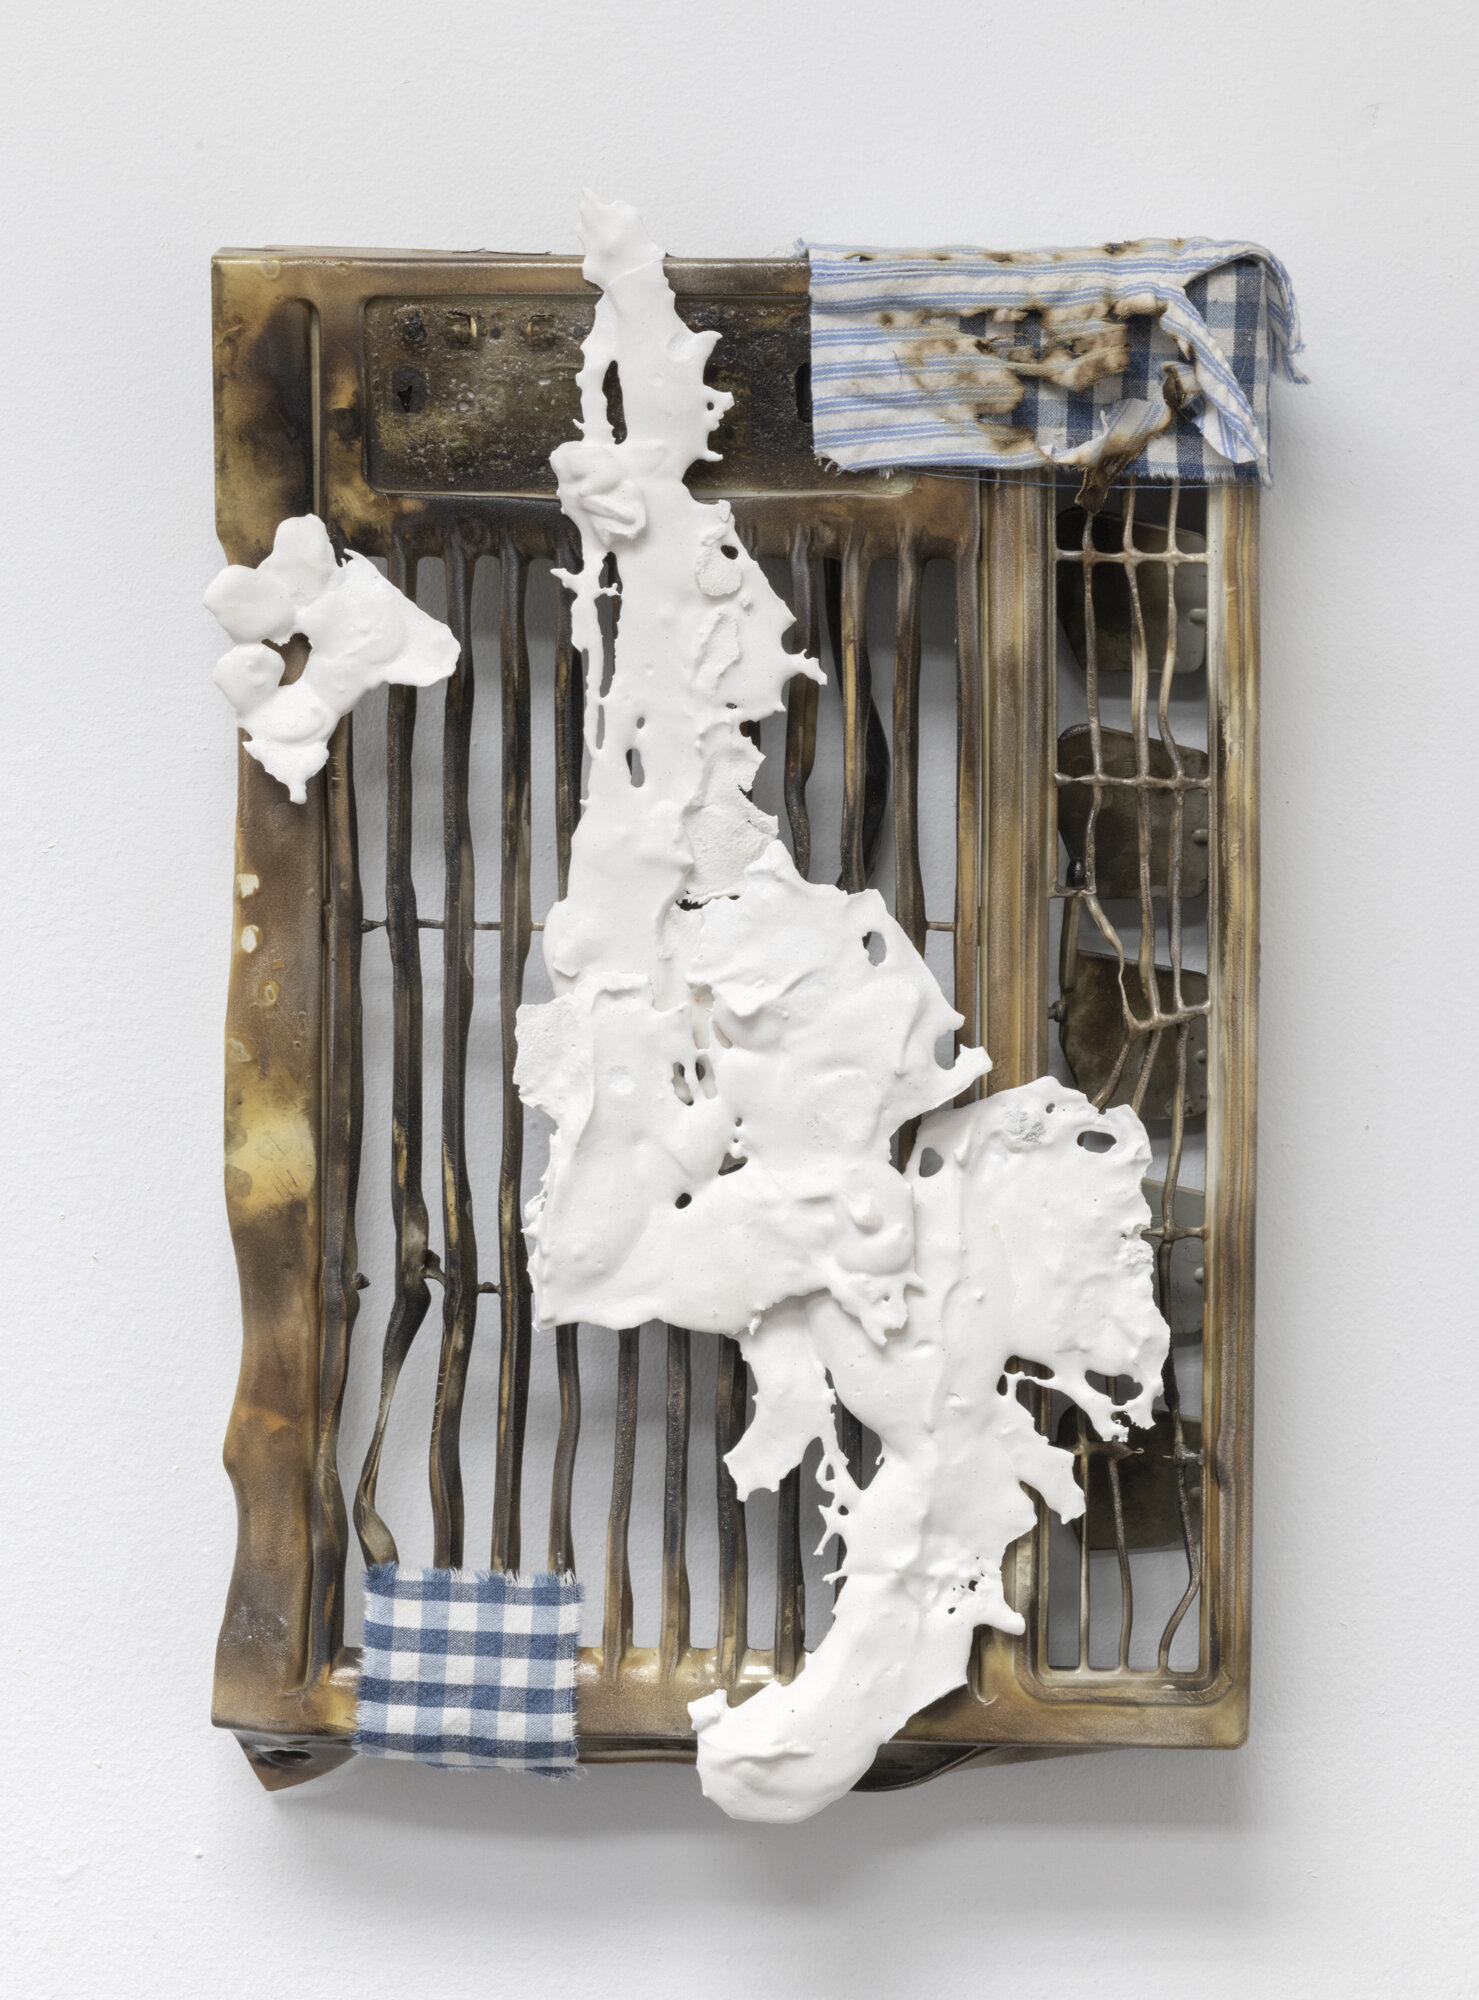  Coco Klockner,  Nothing Wish,  2021. Air conditioning panel, plaster, fabric, adhesive. 18 x 14 x 4 inches. 